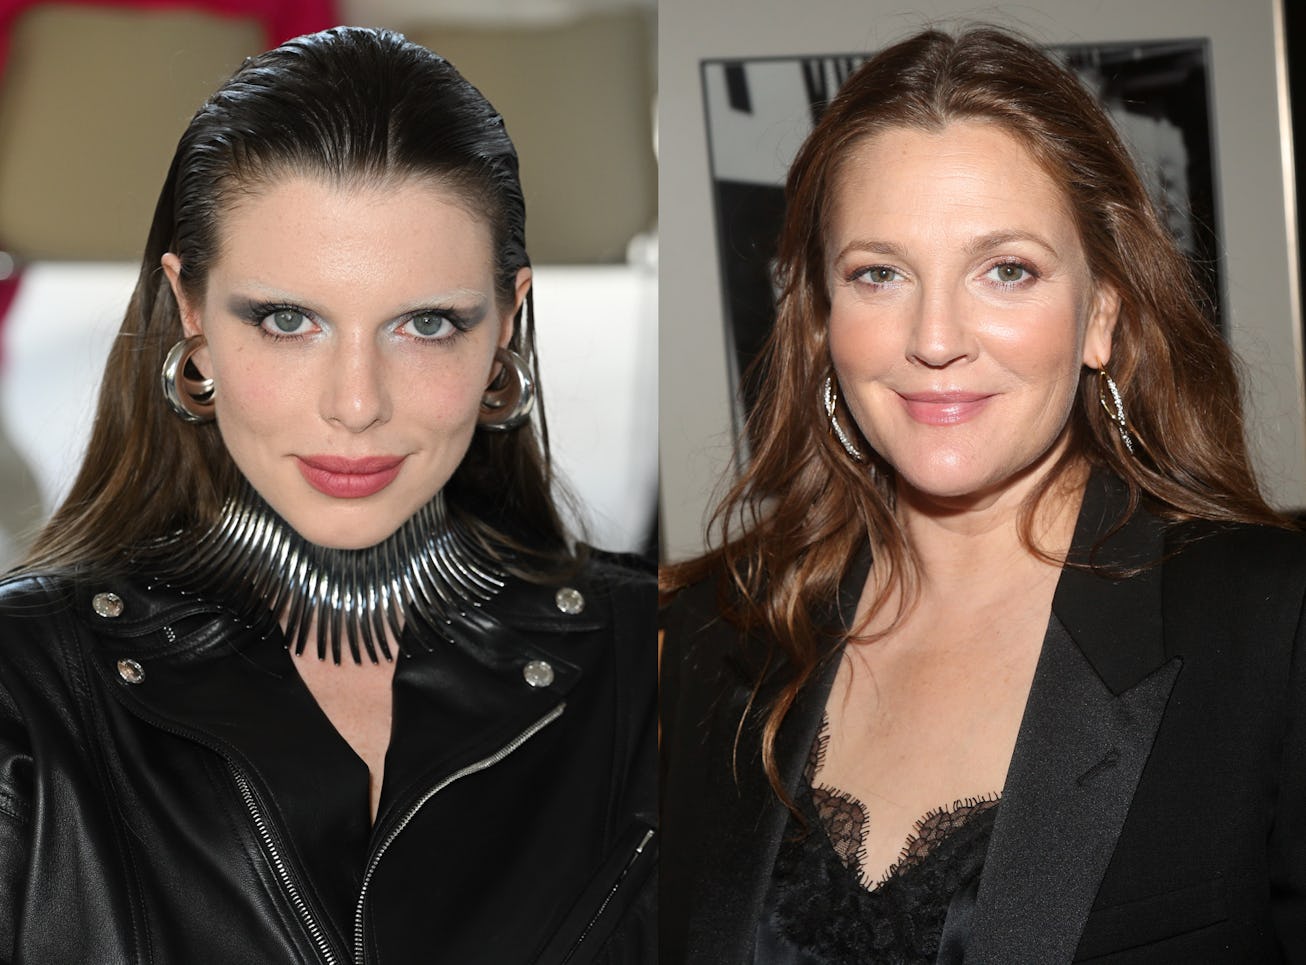 Julia Fox and Drew Barrymore will be guests on Ziwe season 2